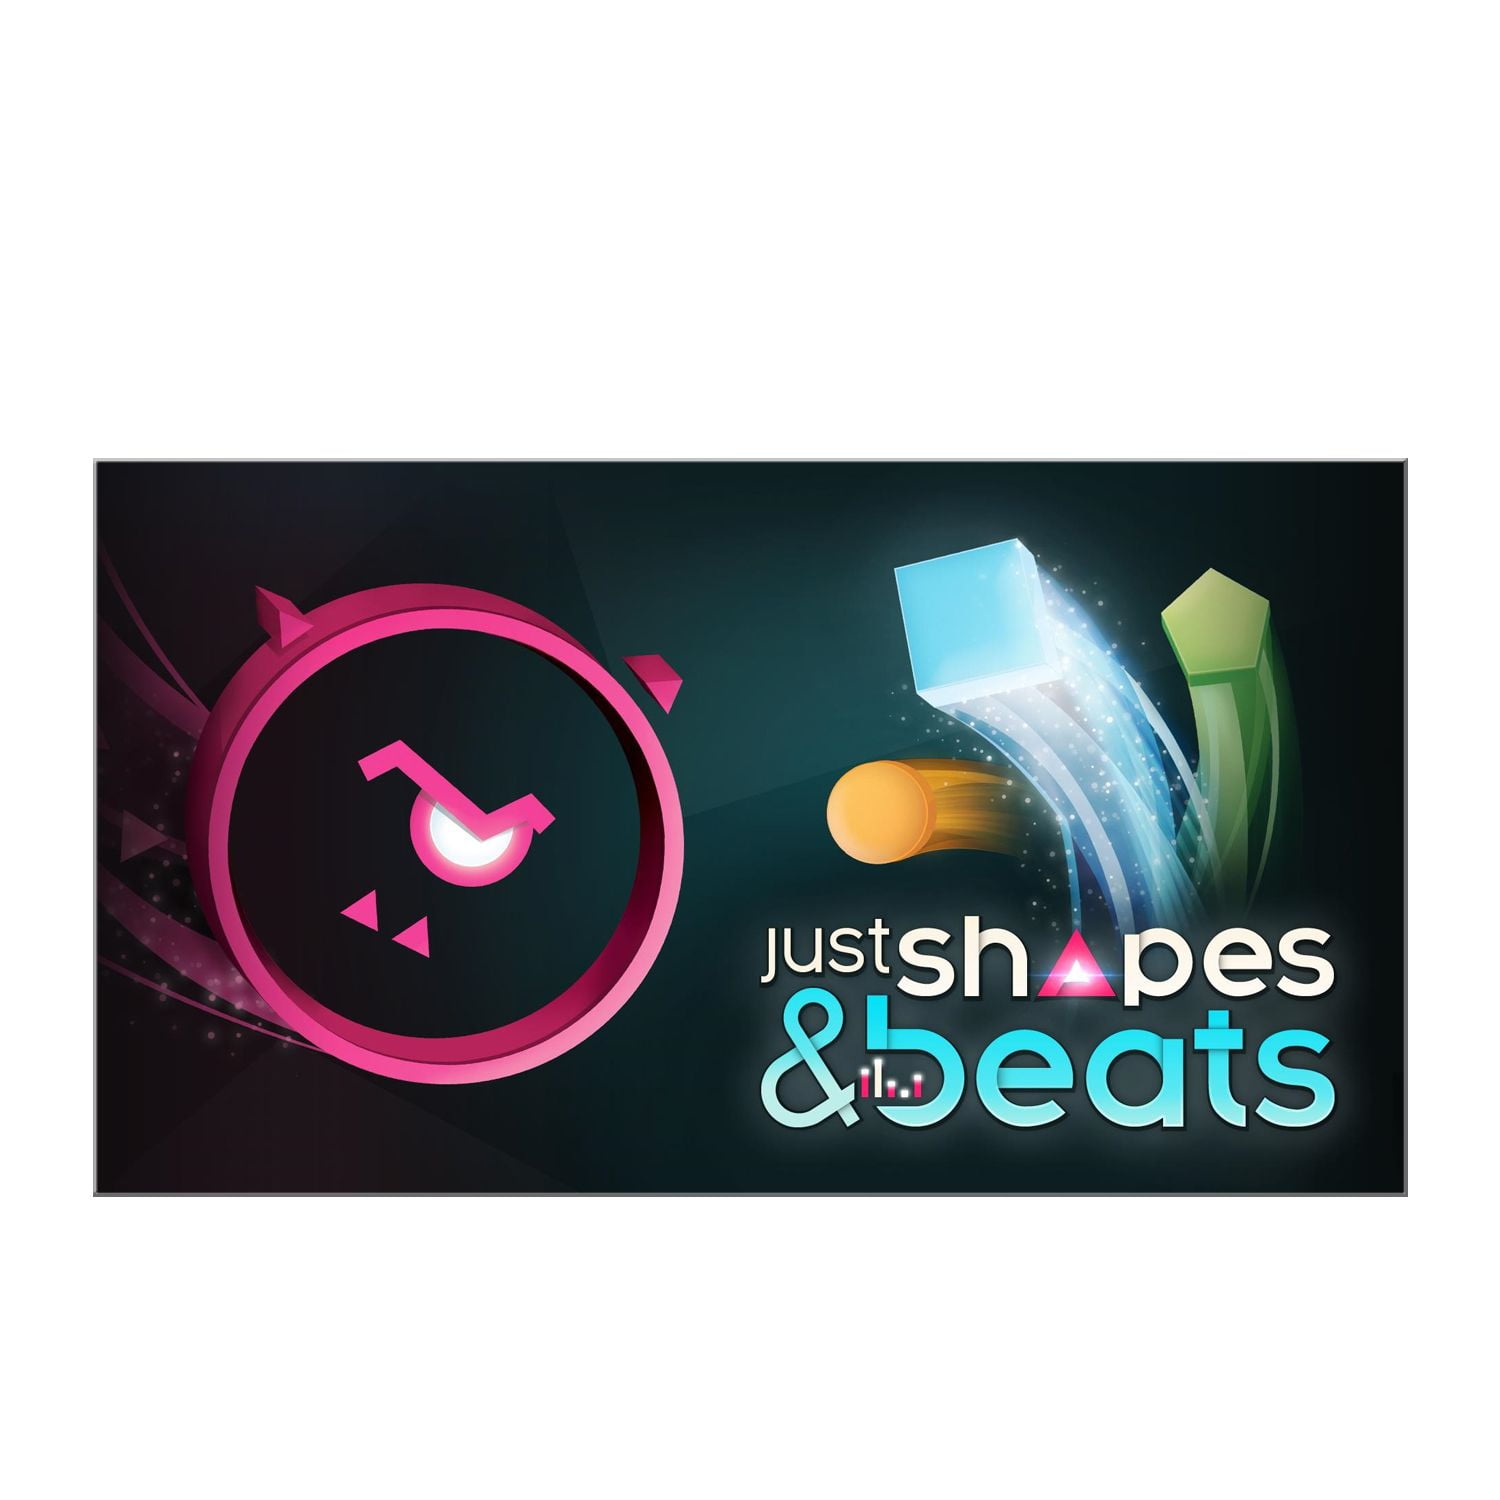 Just Shapes and Beats - Nintendo Switch [Digital] 